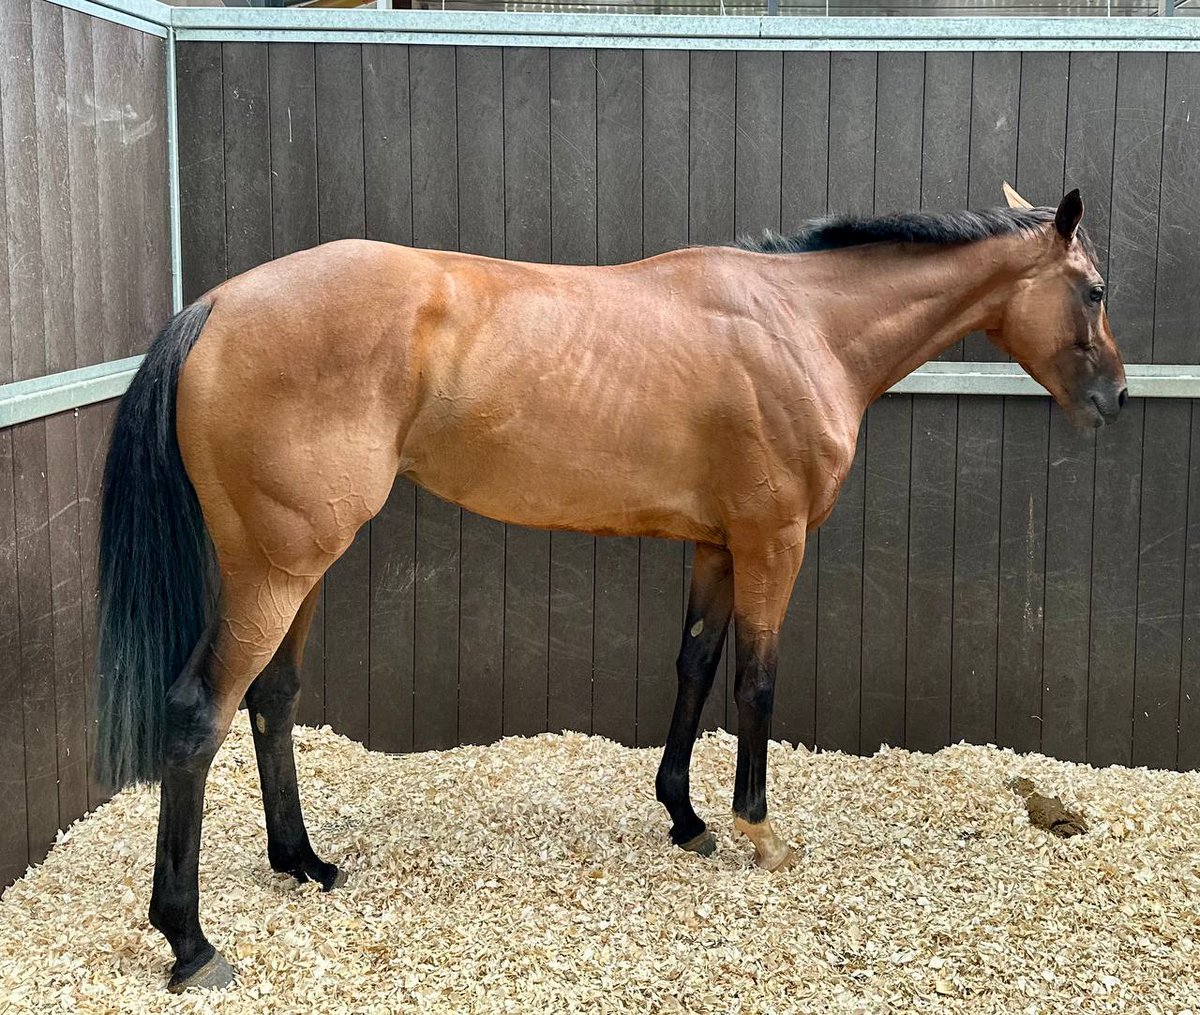 We've got a fantastic weekend planned for our star filly Carrigeen Kampala this month 🔥

- Members stable visit ✅
- Team social ✅
- Race day in hospitality to see Carrie go for the 4 timer ✅

Who's excited for this?! I hear there'll be a cake 👀 @OBMRacing
#HorseRacing